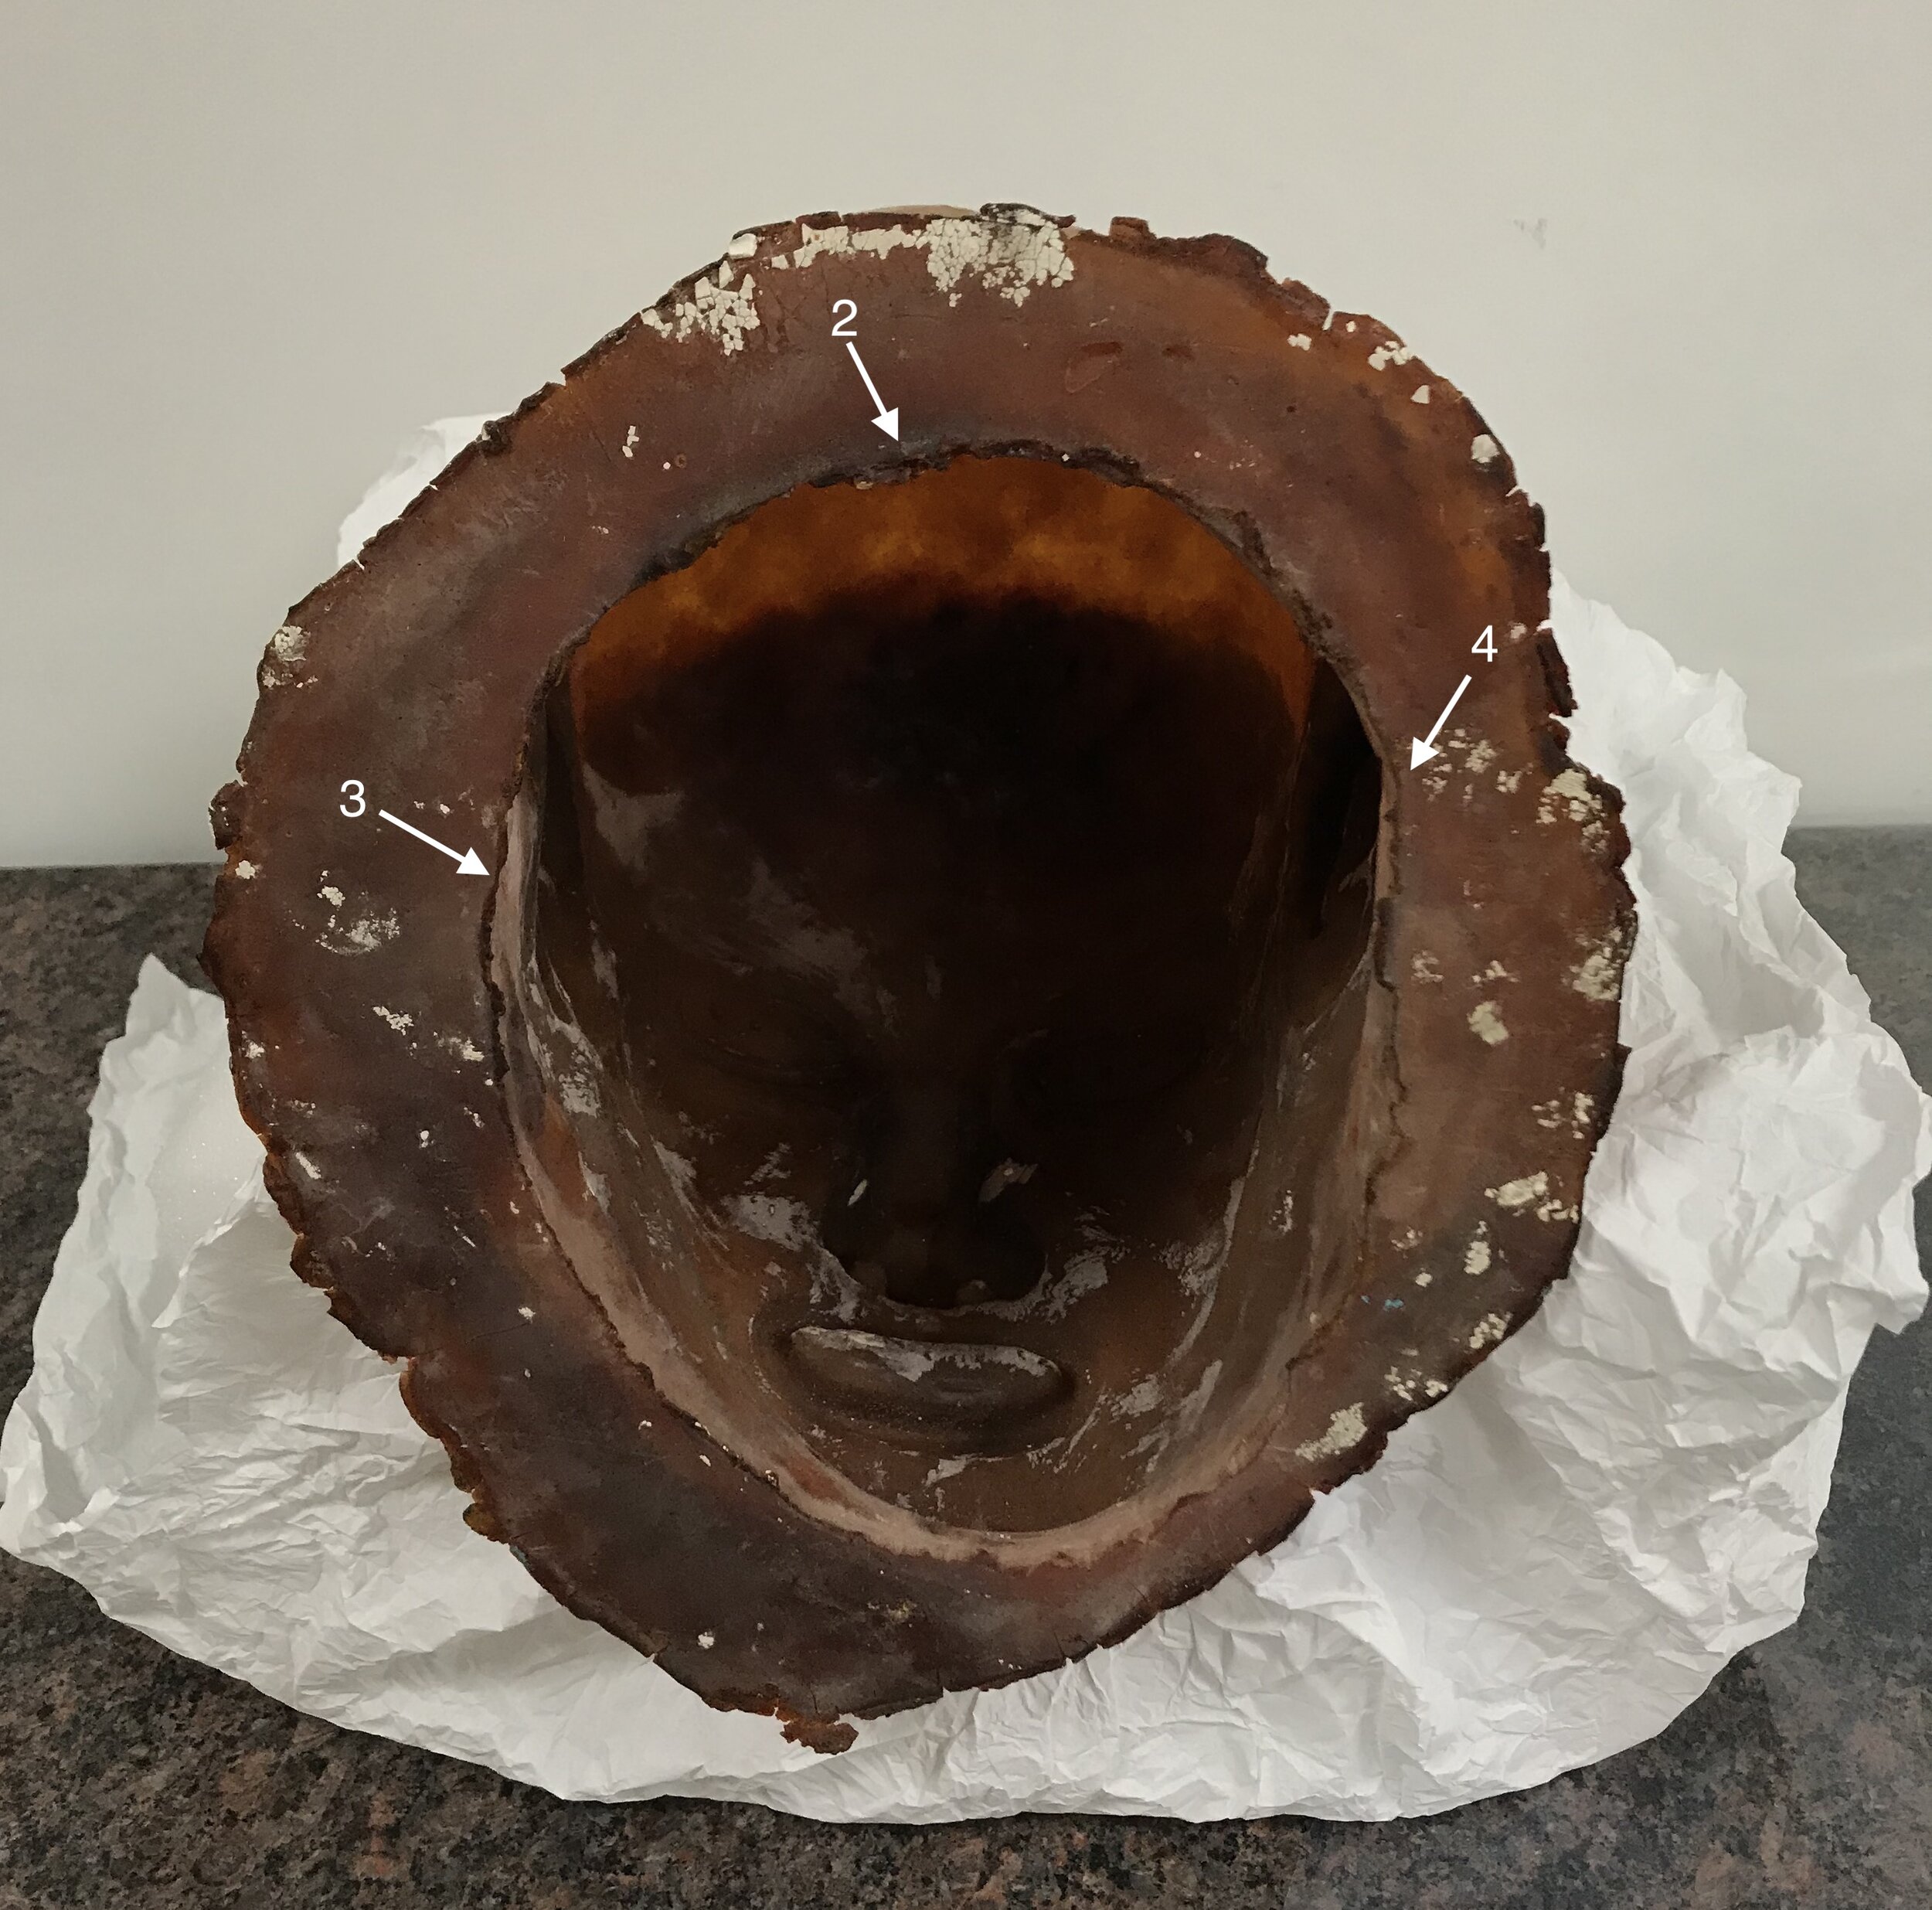  Excess material around interior ring.  Sample 2: crystallized and discolored, but less degradation than sample 1  Sample 3: rubbery and discolored   Sample 4: least degraded and rubbery   